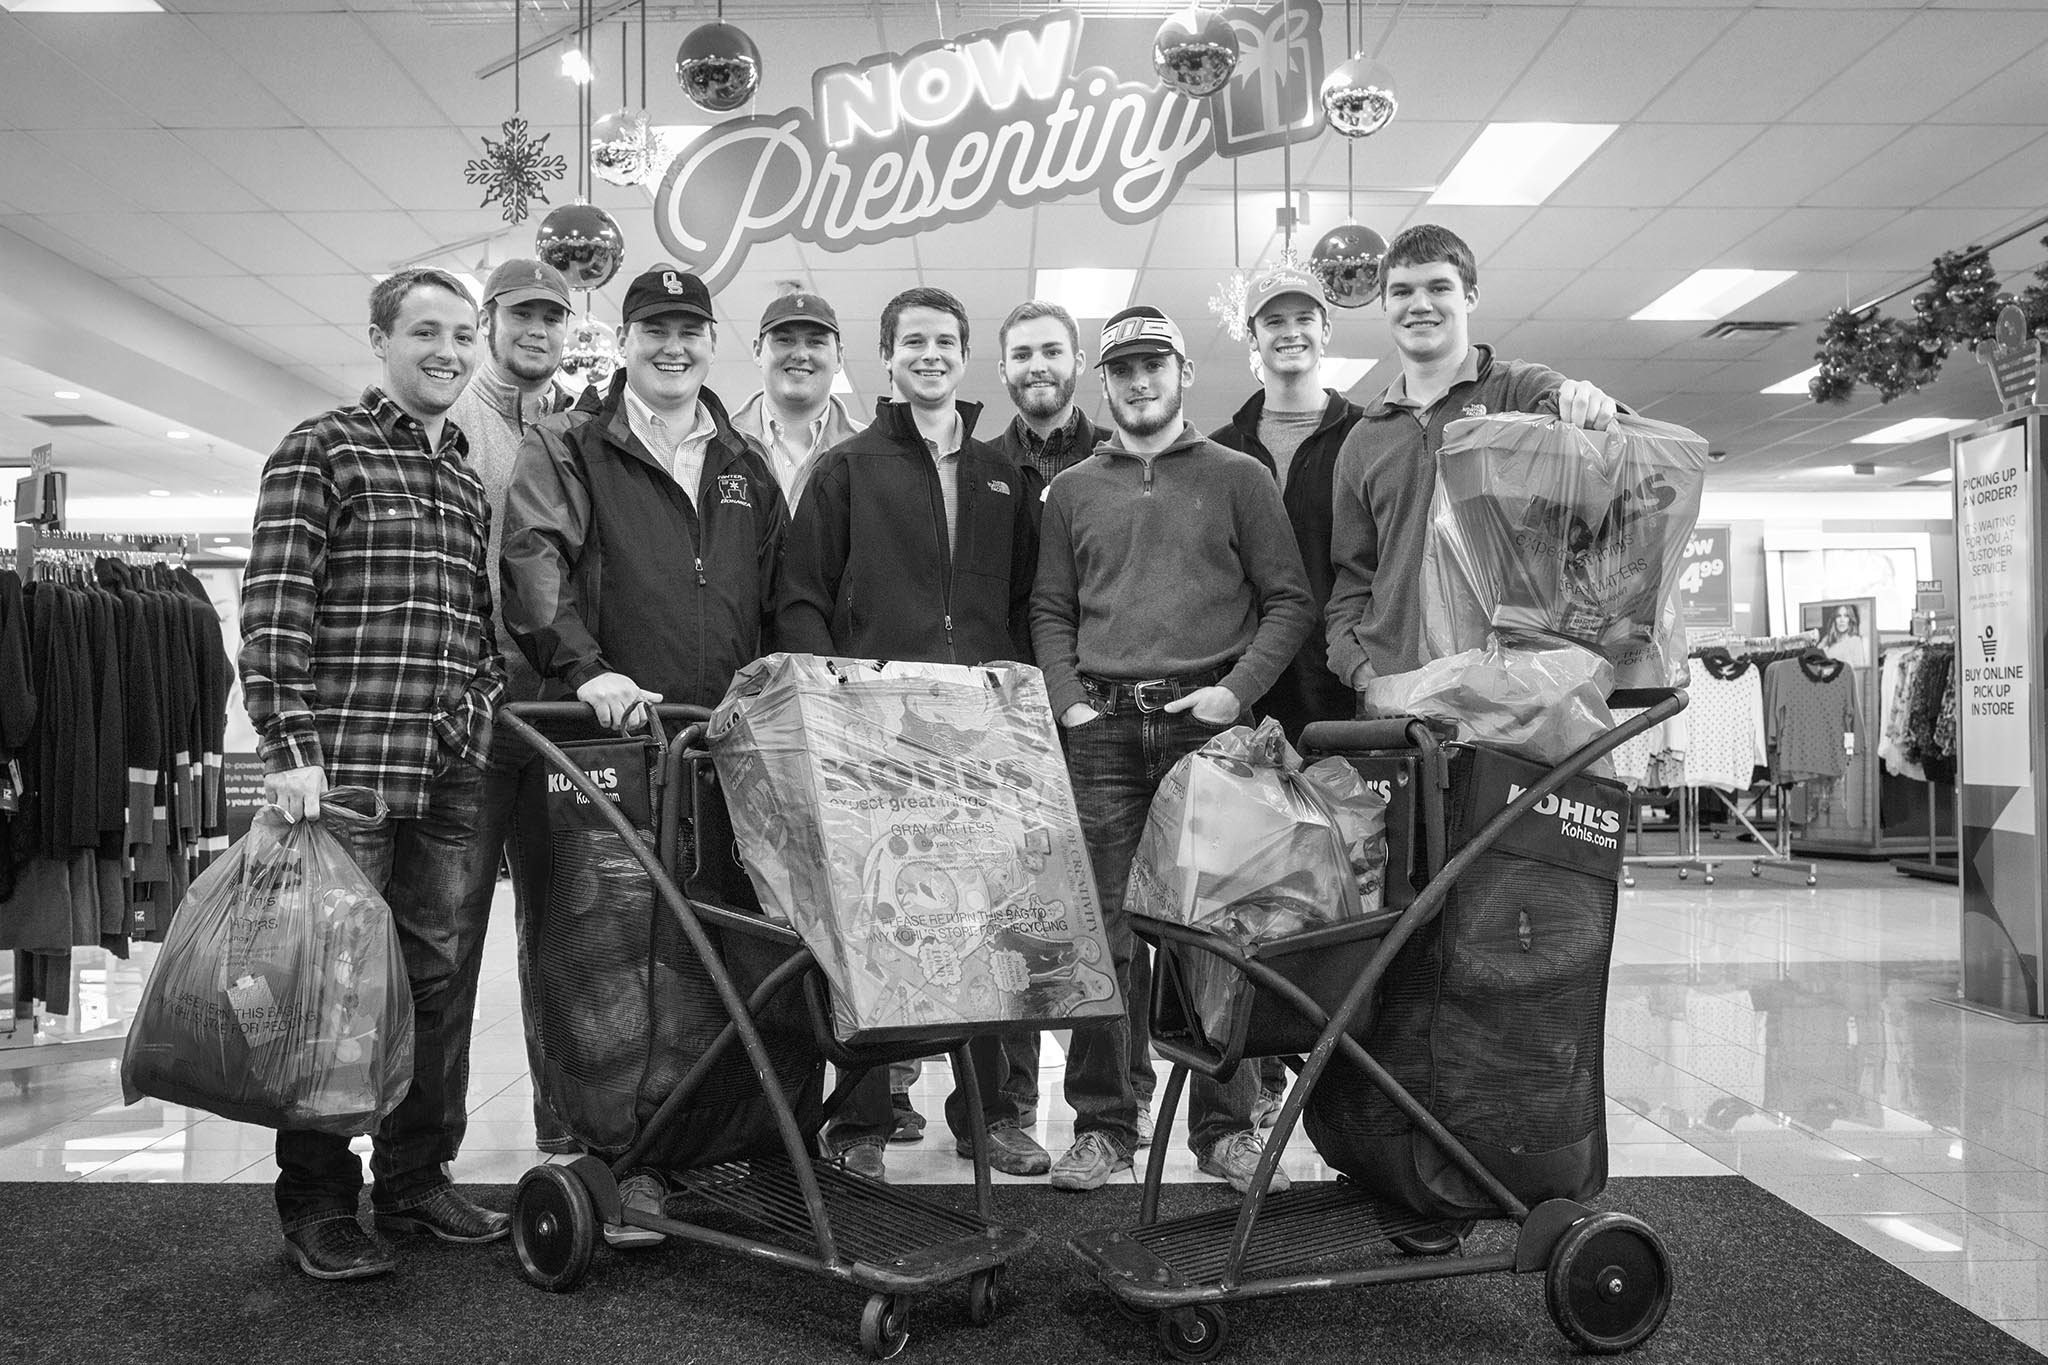 The Oklahoma State University Collegiate Farm Bureau group supported fellow Oklahomans in 2015 by shopping for toys and gift items for children in need through the Salvation Army Angel Tree program and the White Fields Boys Home.